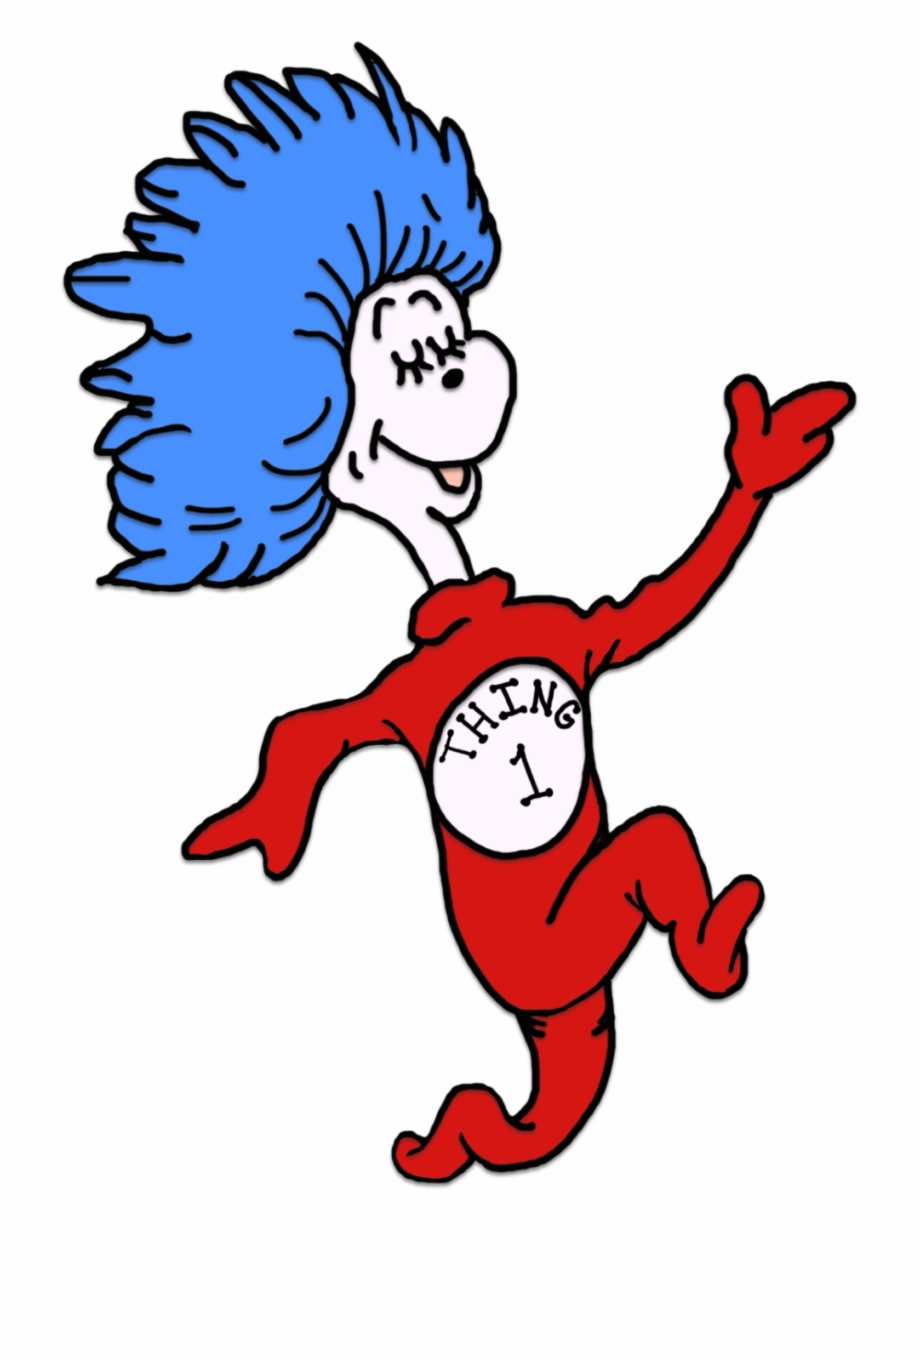 Dr Seuss Thing 1 Free PNG Images & Clipart Download #3219004.